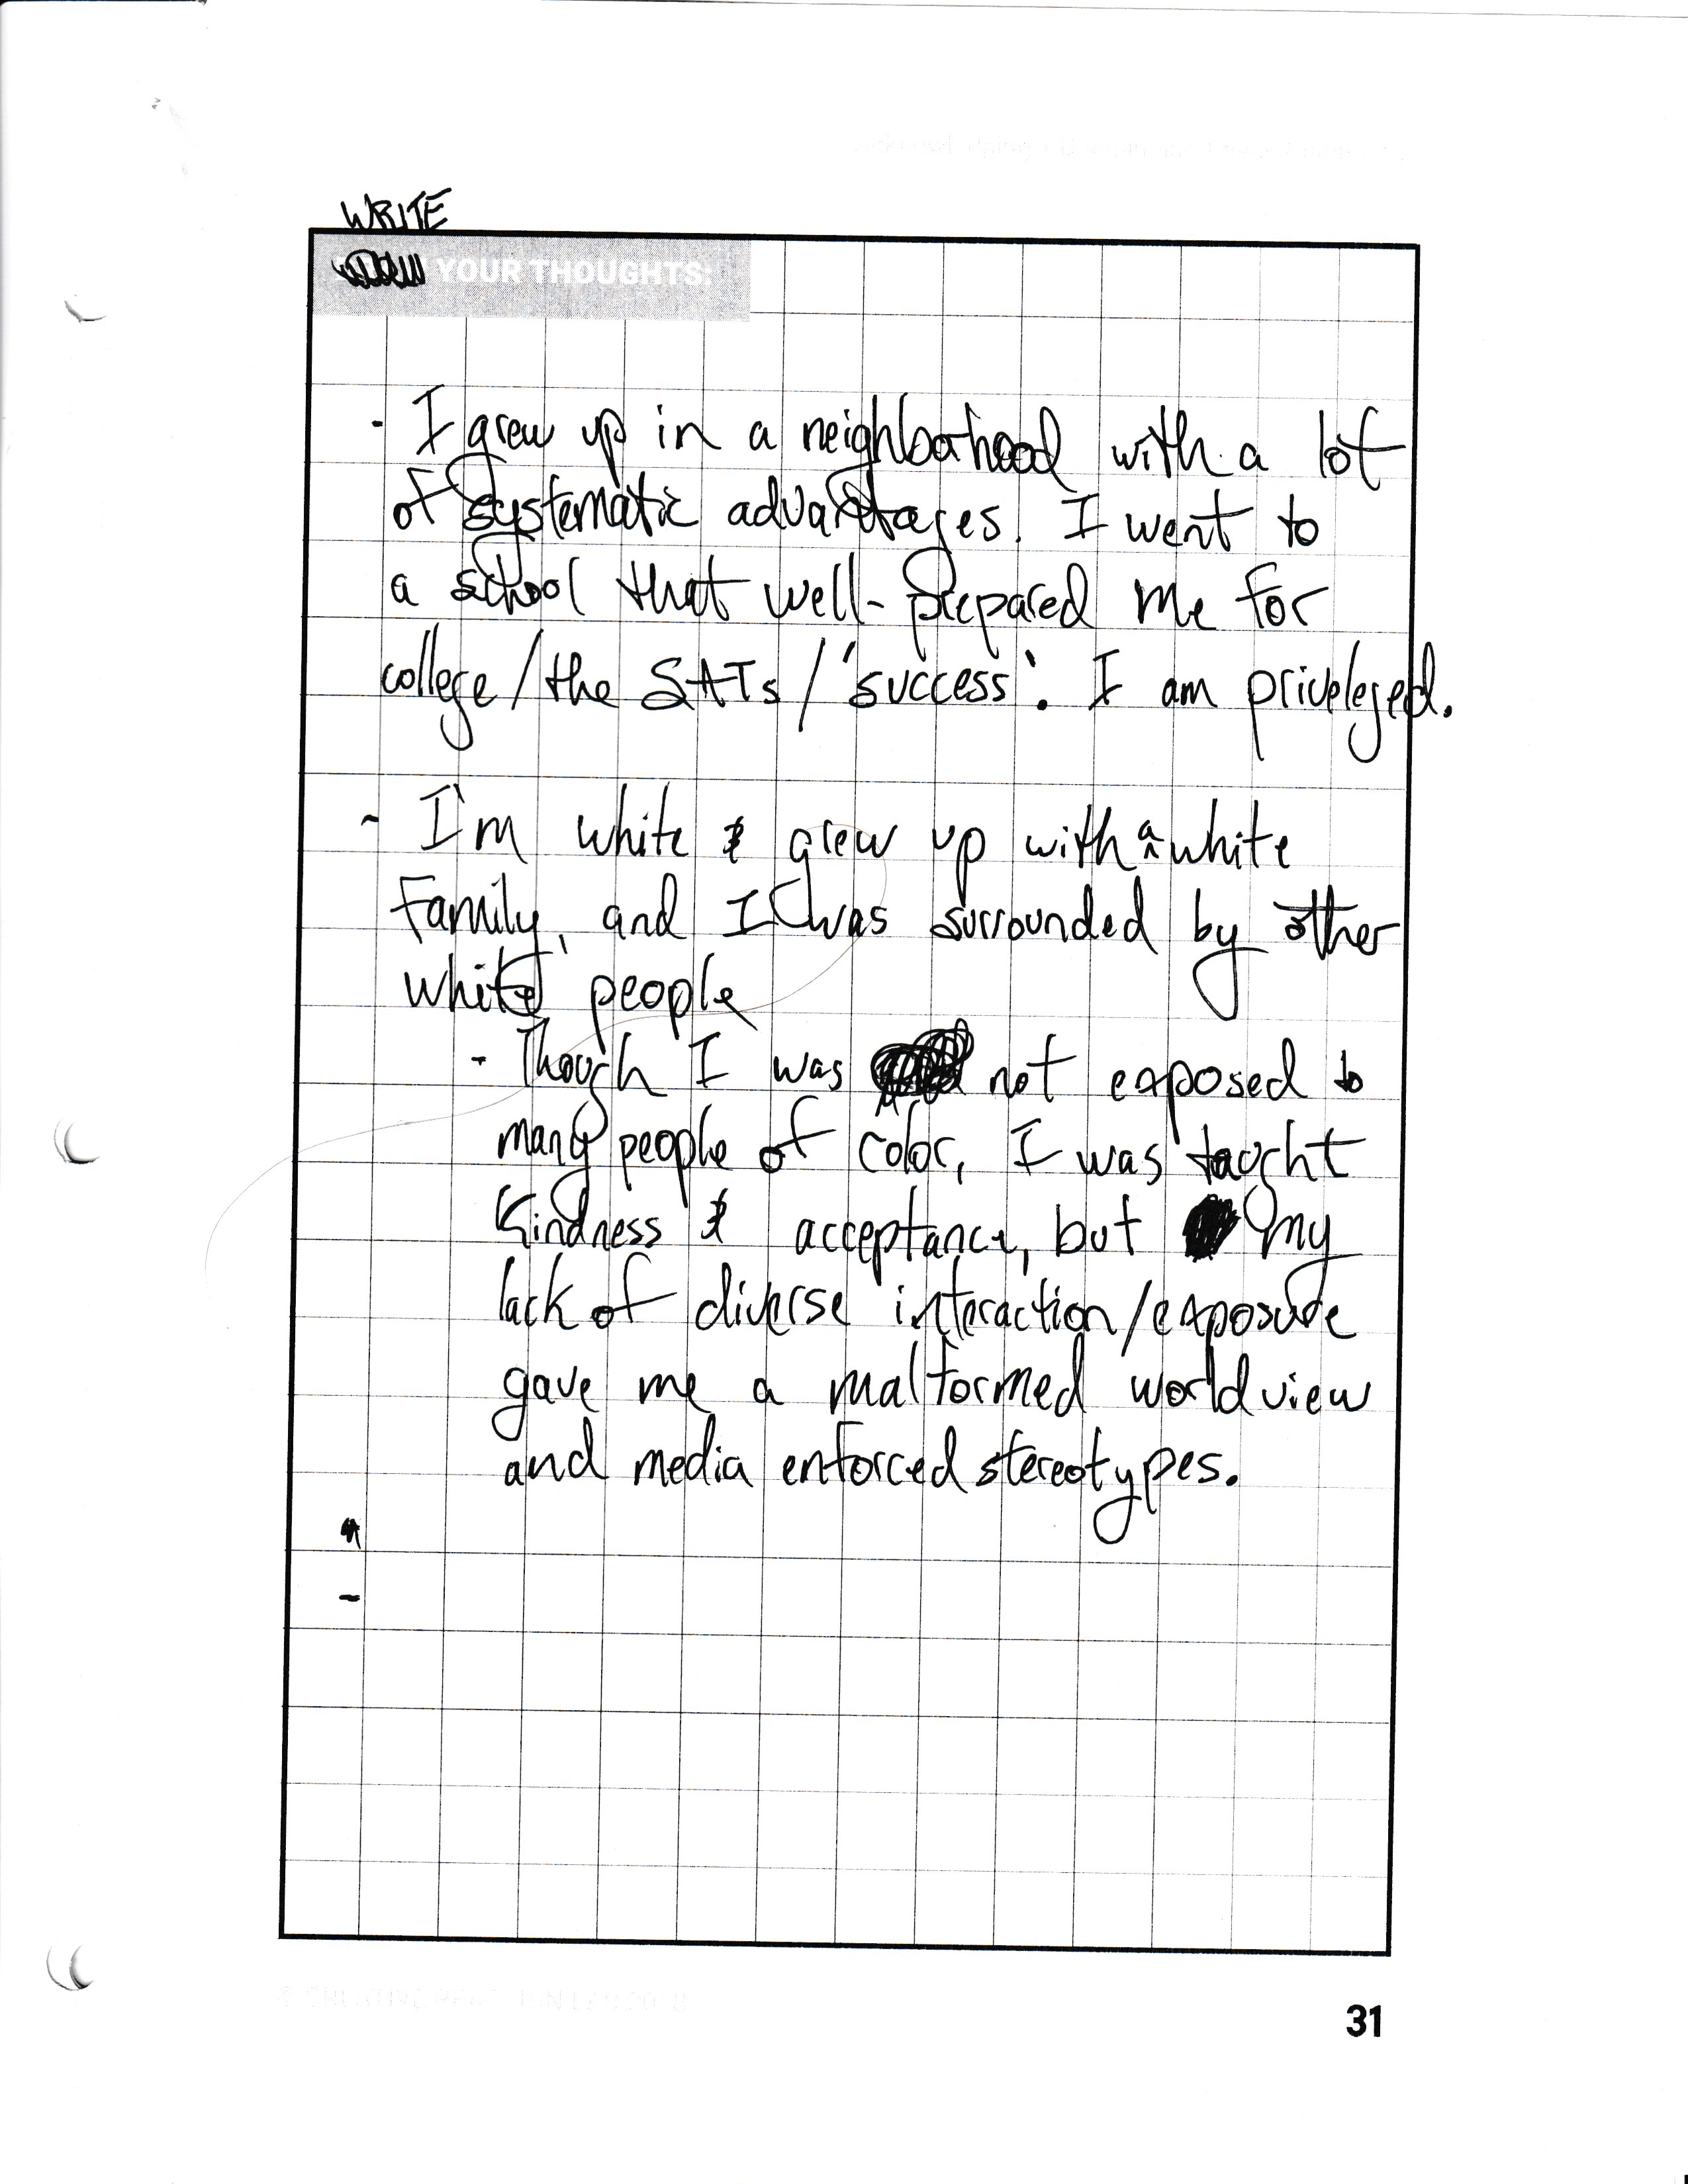 Image 8 - This image is of handwritten text by Vikki Klein that further explains their understanding of their relationship to power.